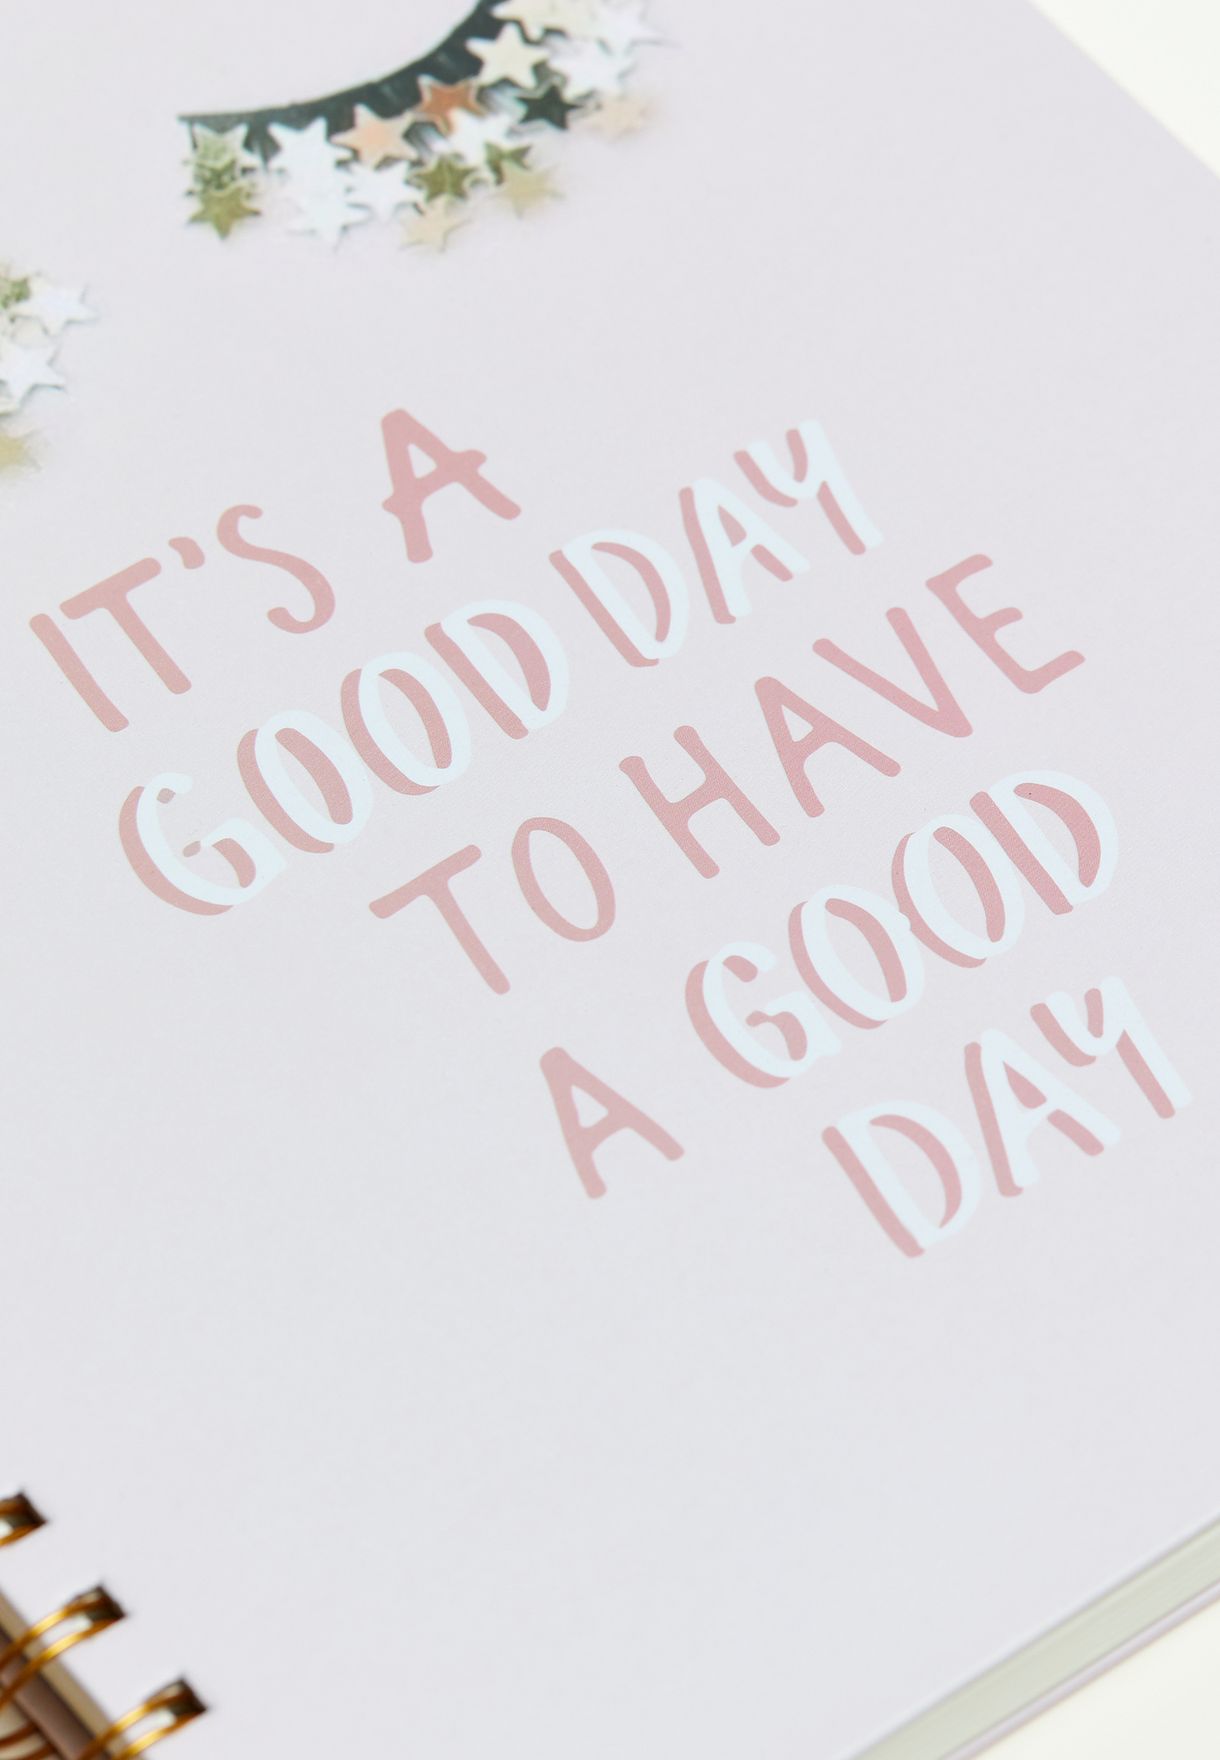 A4 Its A Good Day Notebook